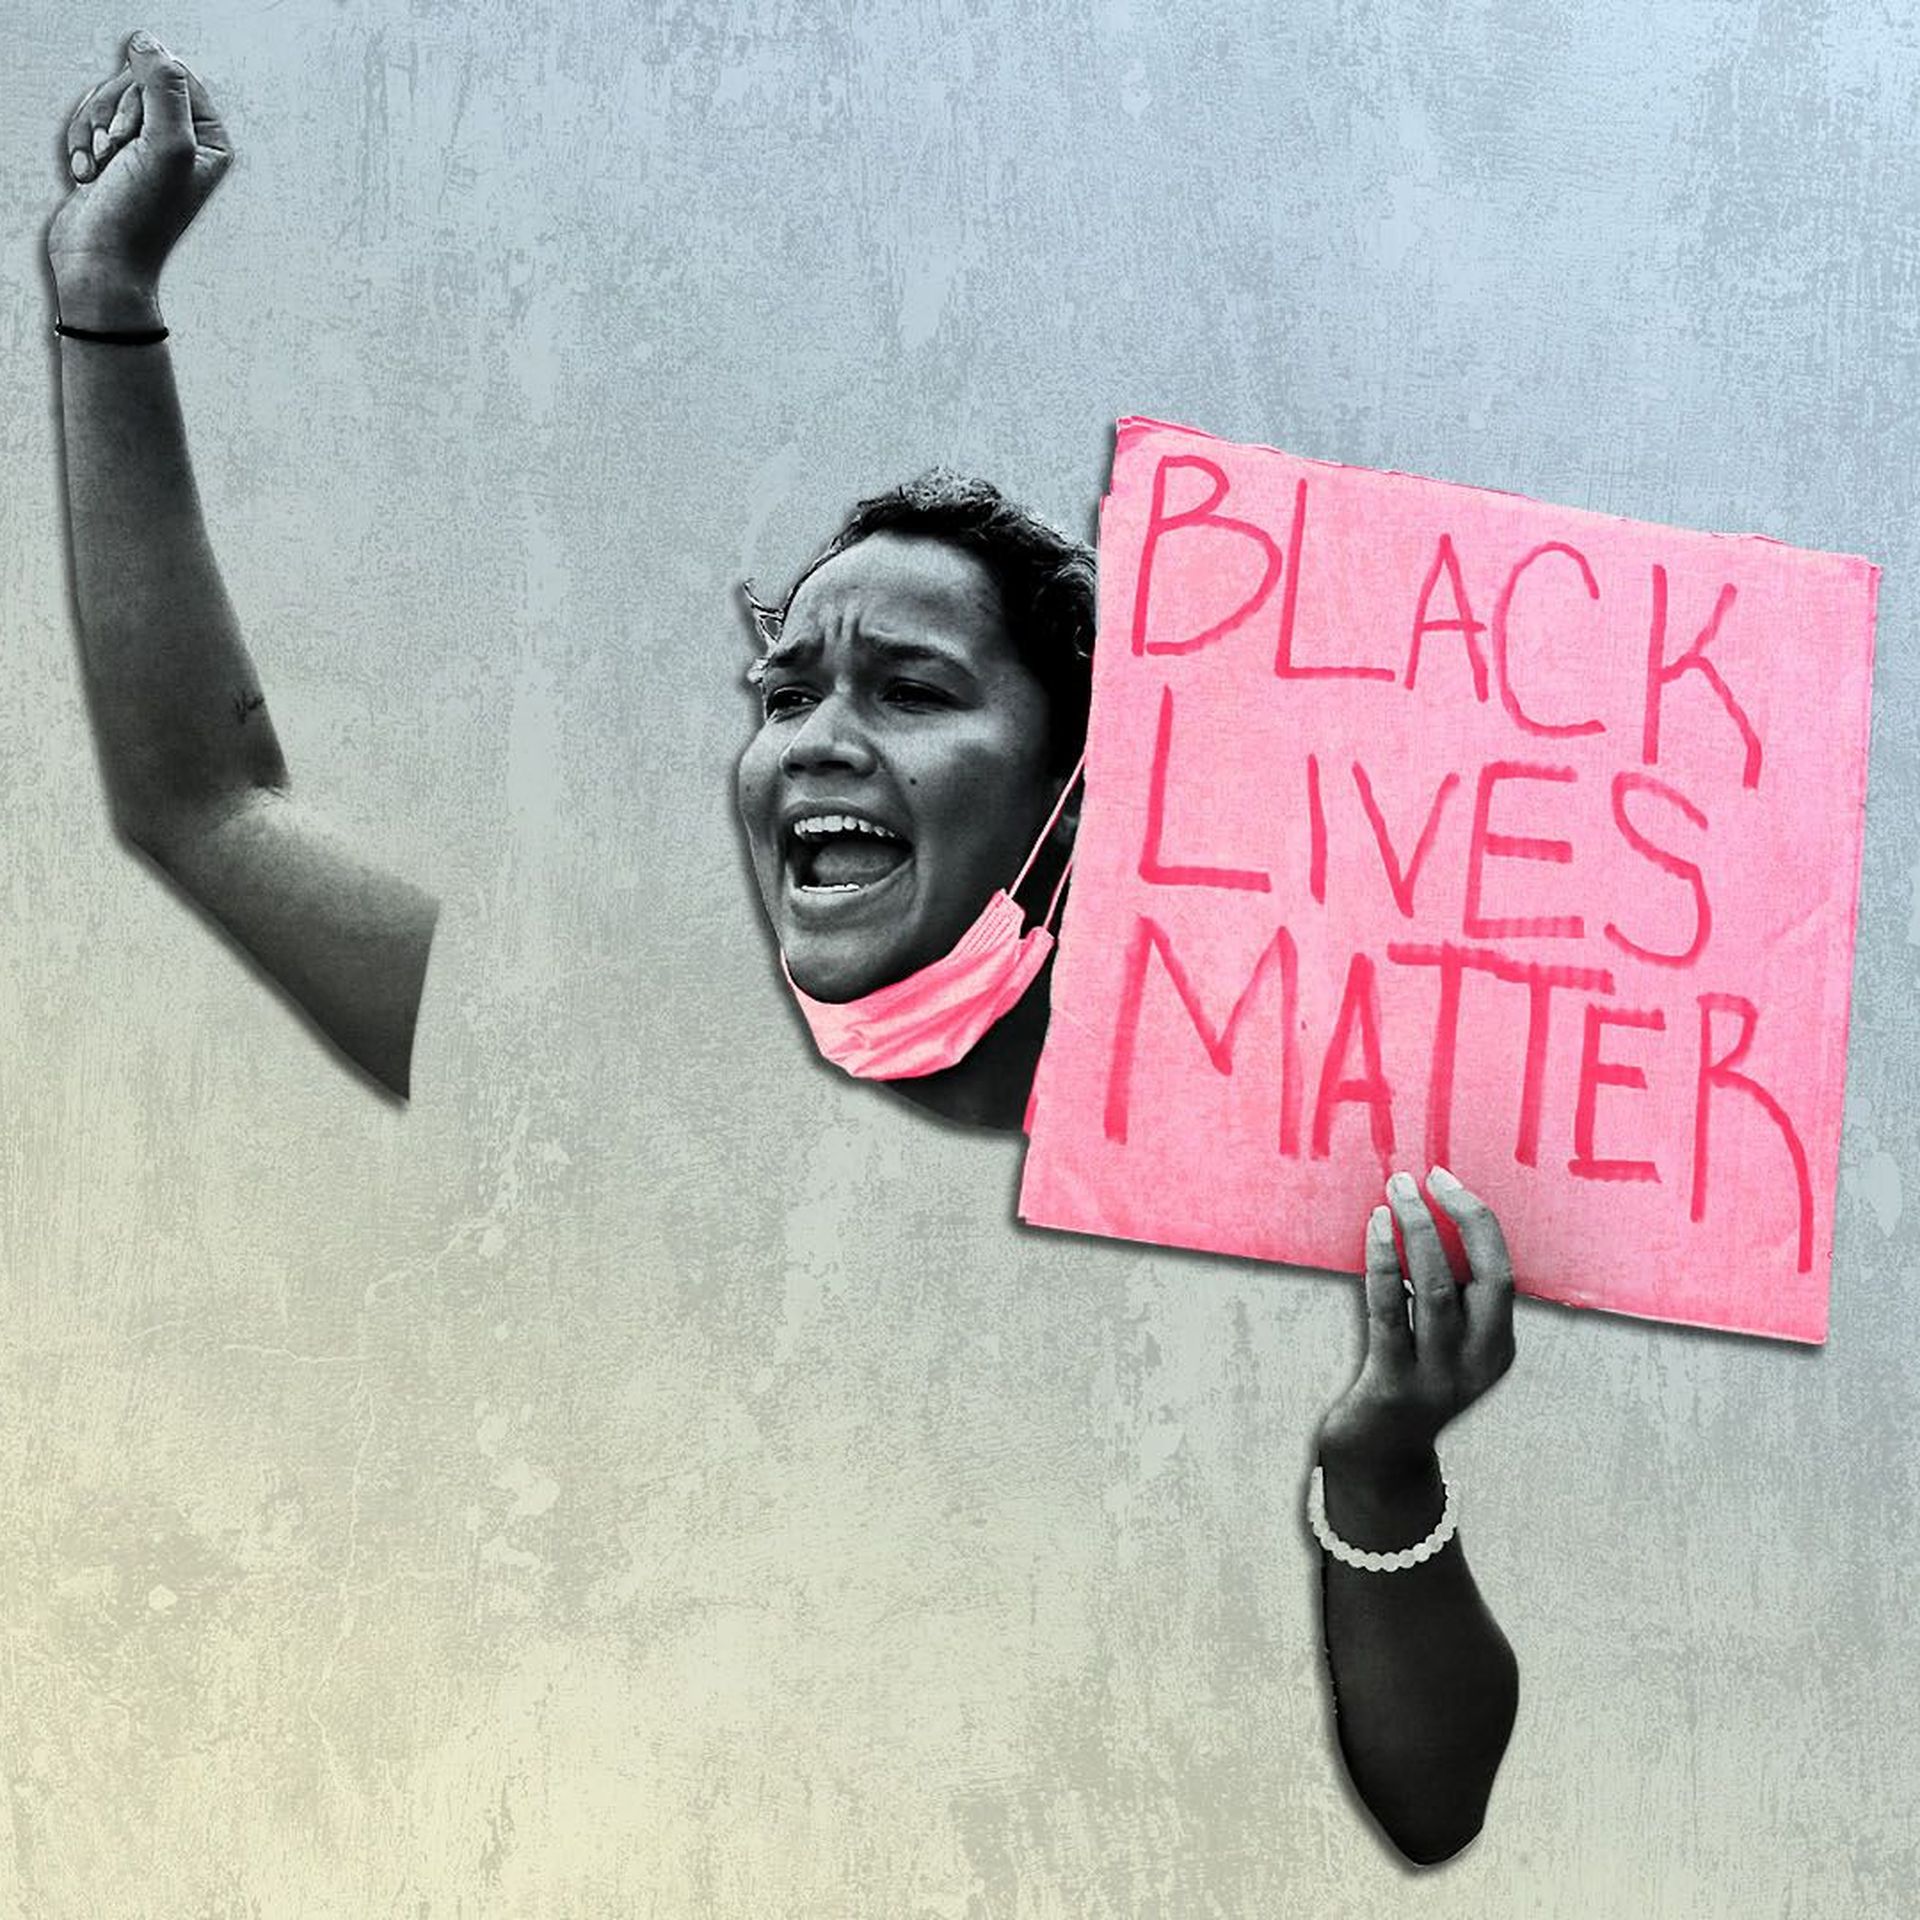 Photo illustration of a protester holding a sign that says, "Black Lives Matter."